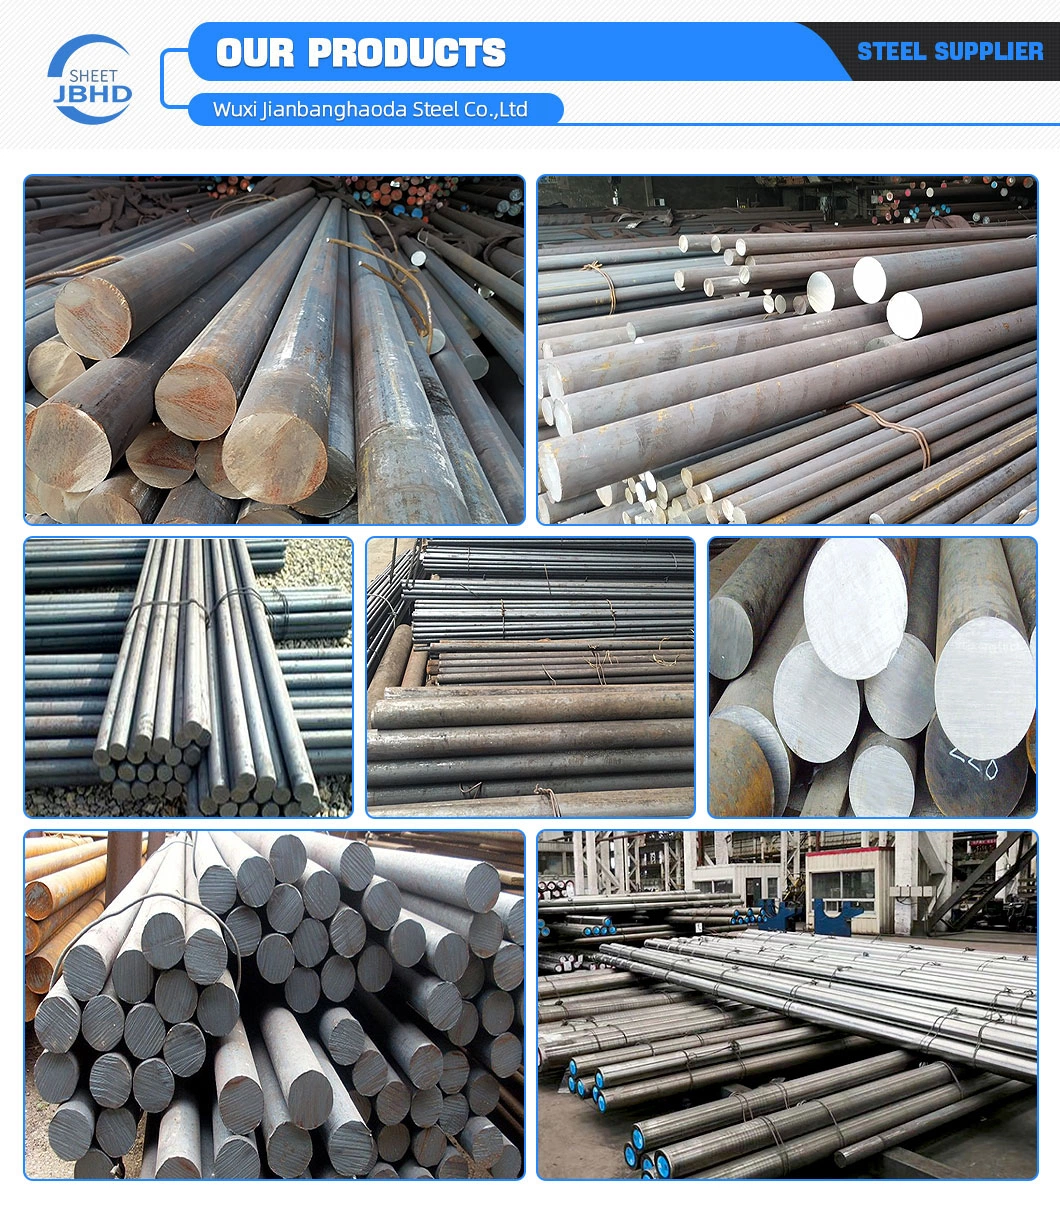 Hot Rolled Color Coated Surface16mnr, SA622mgr. a, S355j2+N Low High Carbon Steel Round Bar for Building Material